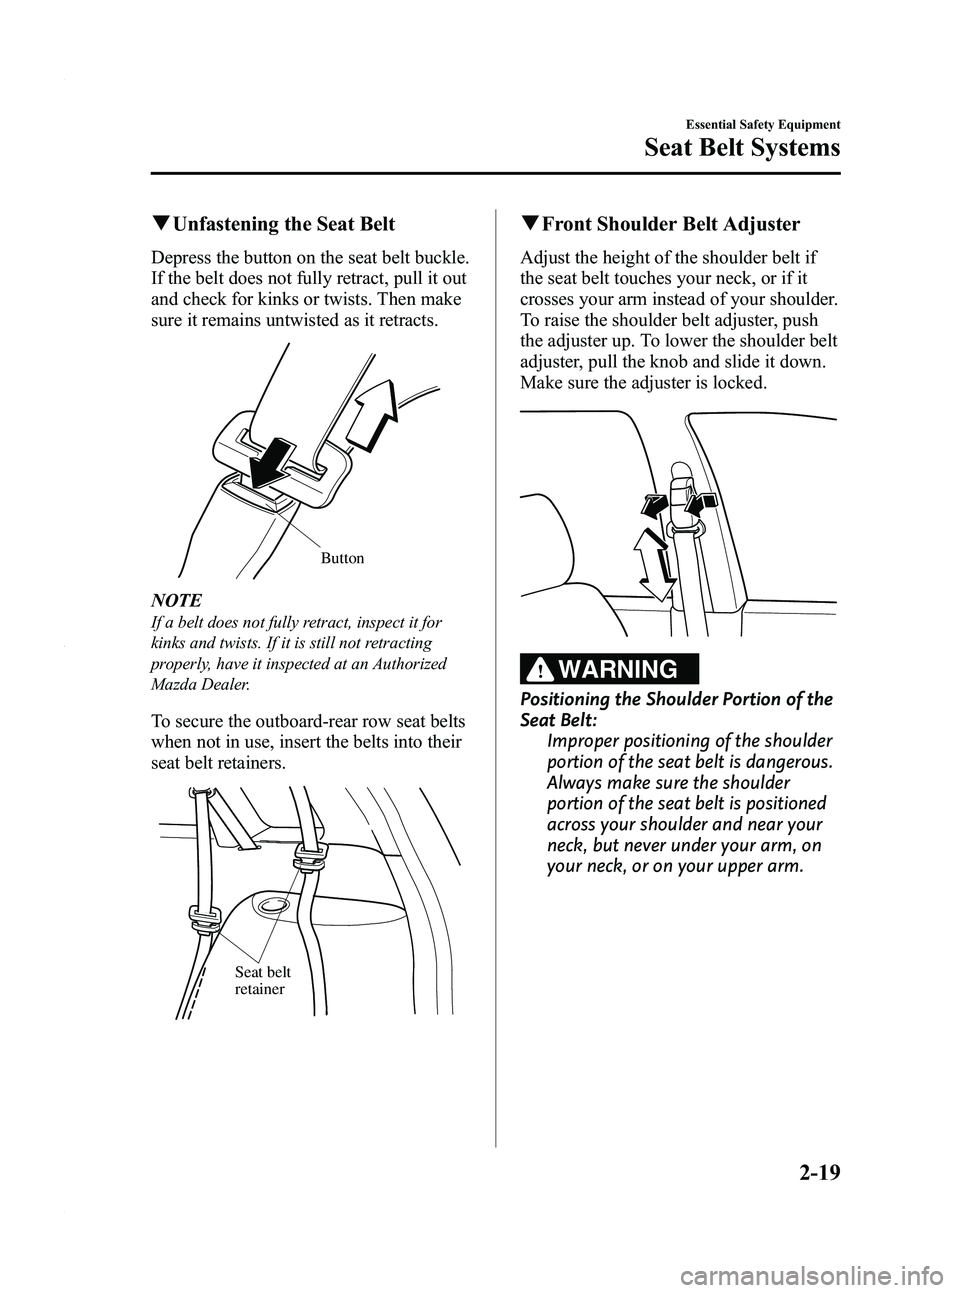 MAZDA MODEL 5 2010 Owners Guide Black plate (31,1)
qUnfastening the Seat Belt
Depress the button on the seat belt buckle.
If the belt does not fully retract, pull it out
and check for kinks or twists. Then make
sure it remains untwi